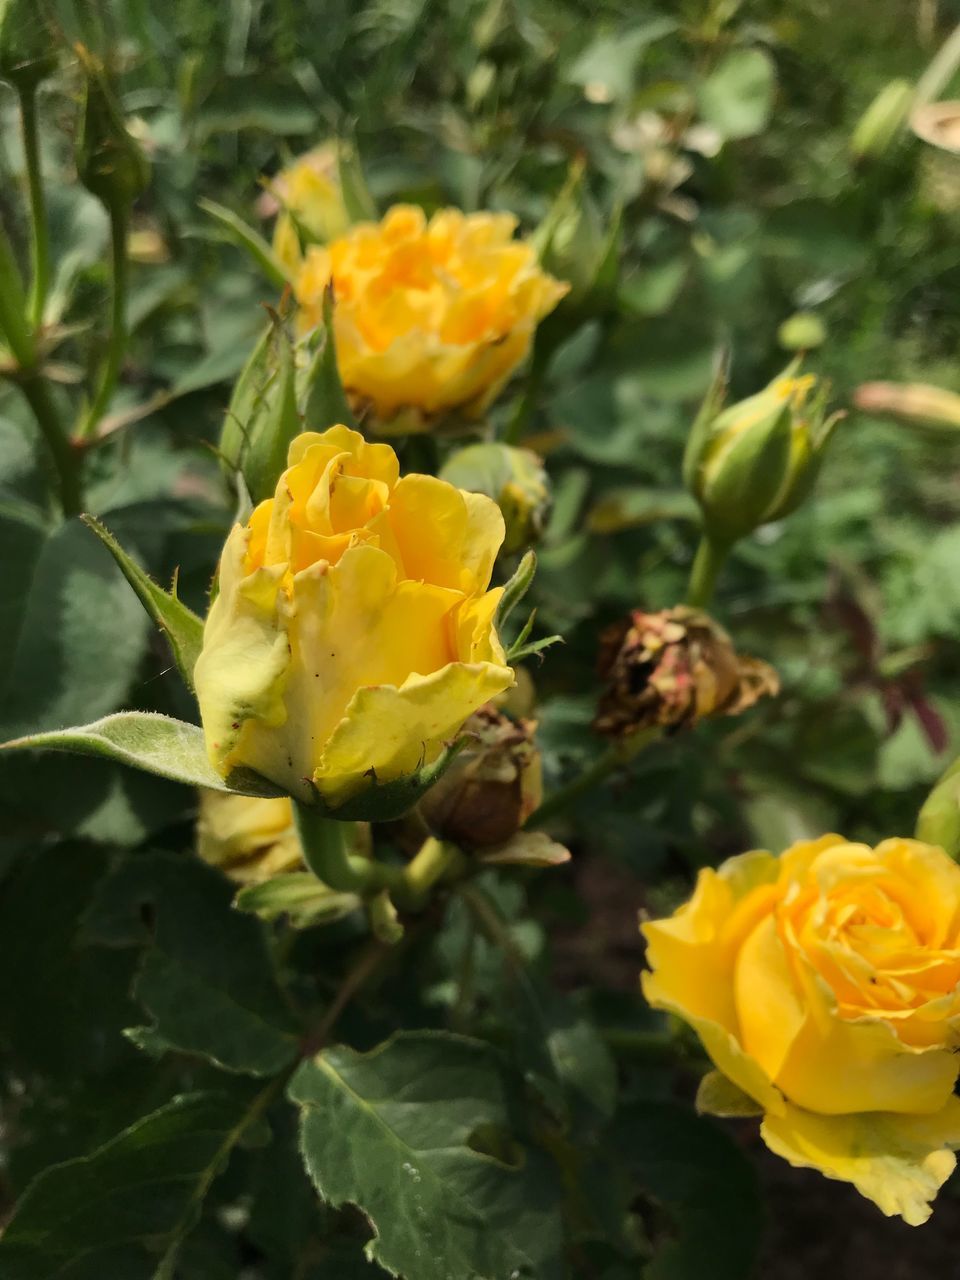 flower, flowering plant, vulnerability, beauty in nature, fragility, plant, petal, freshness, yellow, growth, flower head, inflorescence, close-up, nature, rose, no people, day, outdoors, rose - flower, botany, springtime